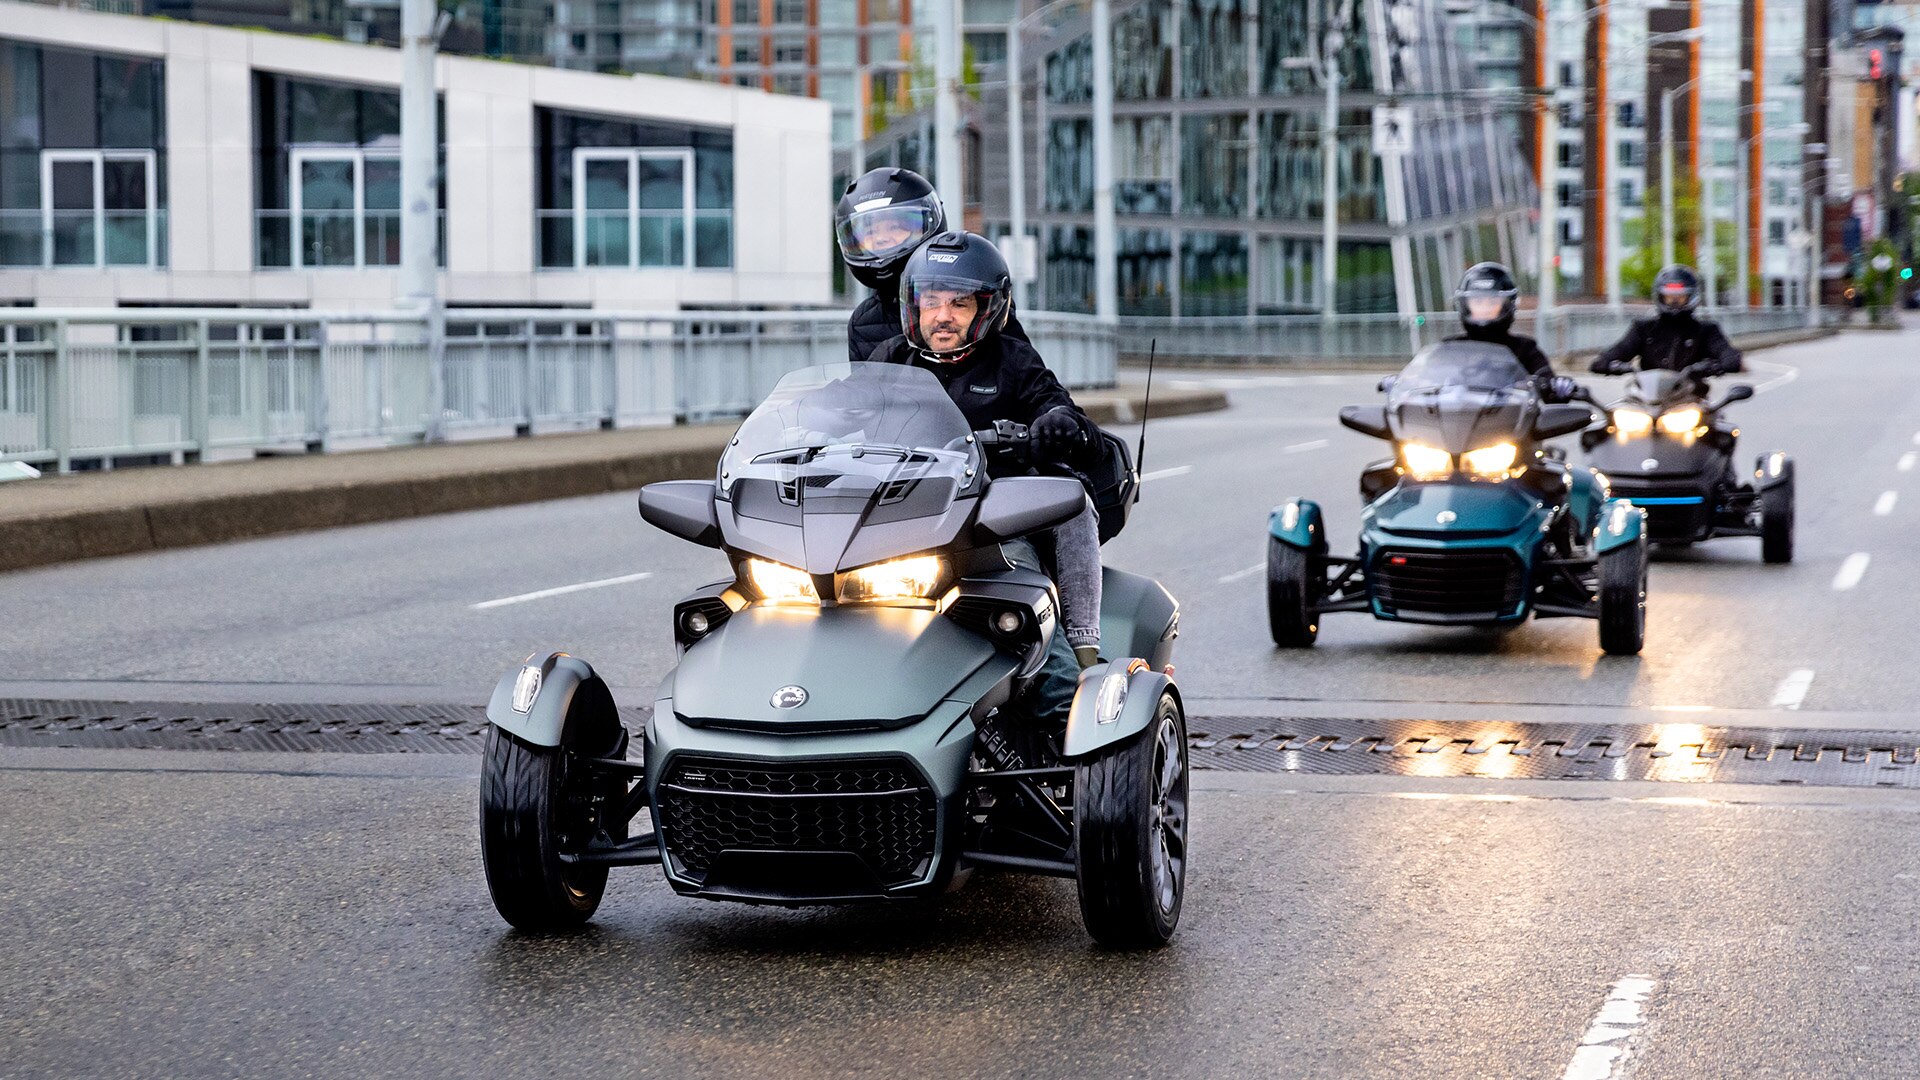 Three Can-Am On-Road Spyder F3 riding through the city